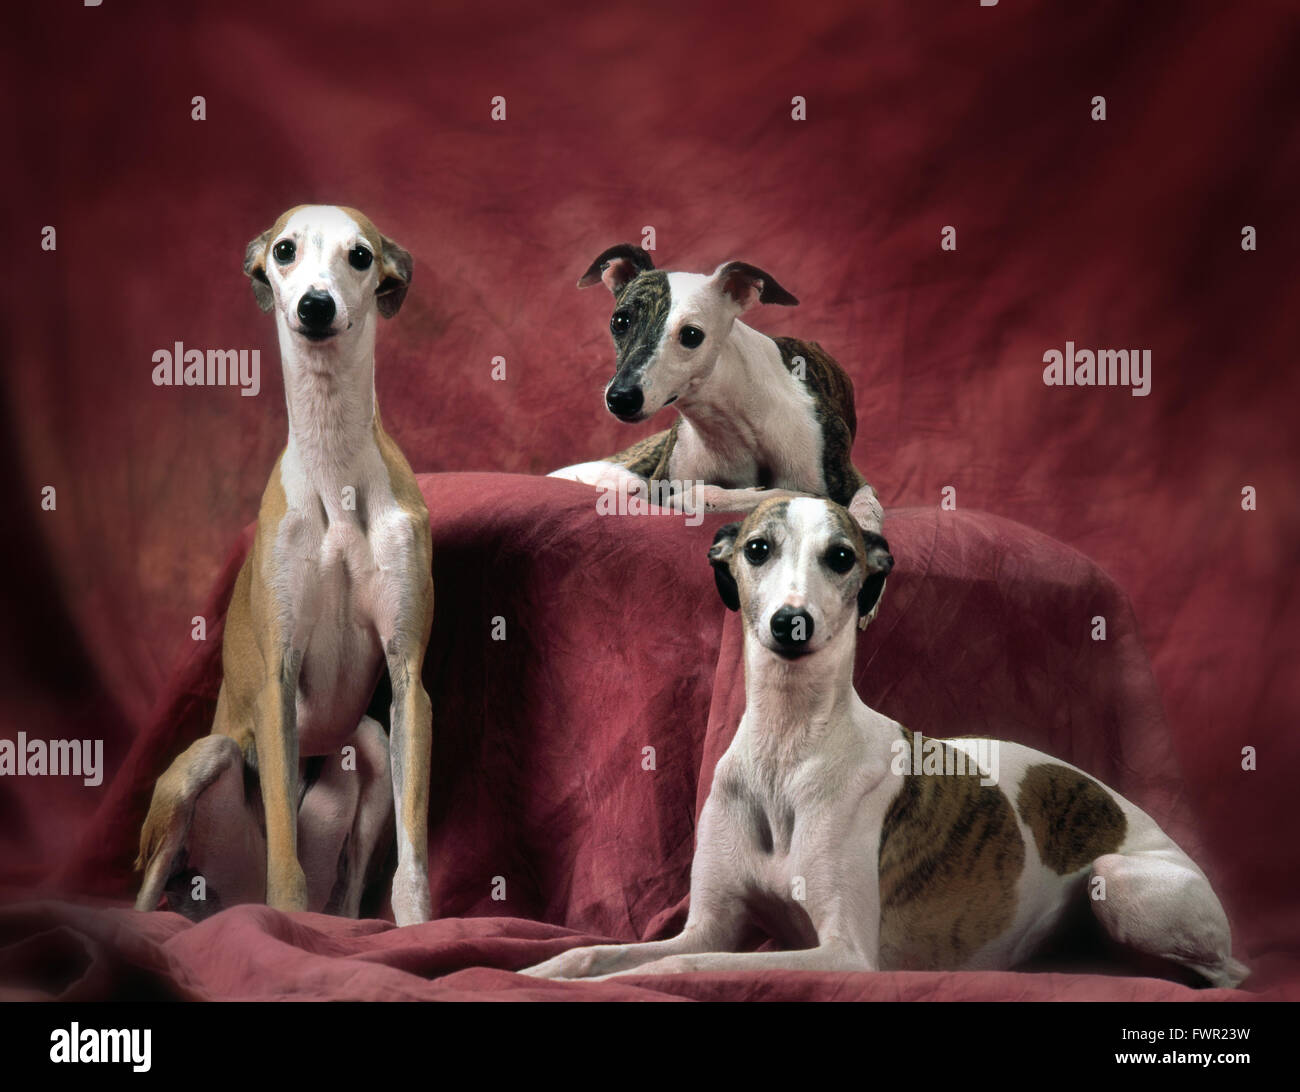 3 whippets on a red studio backdrop Stock Photo